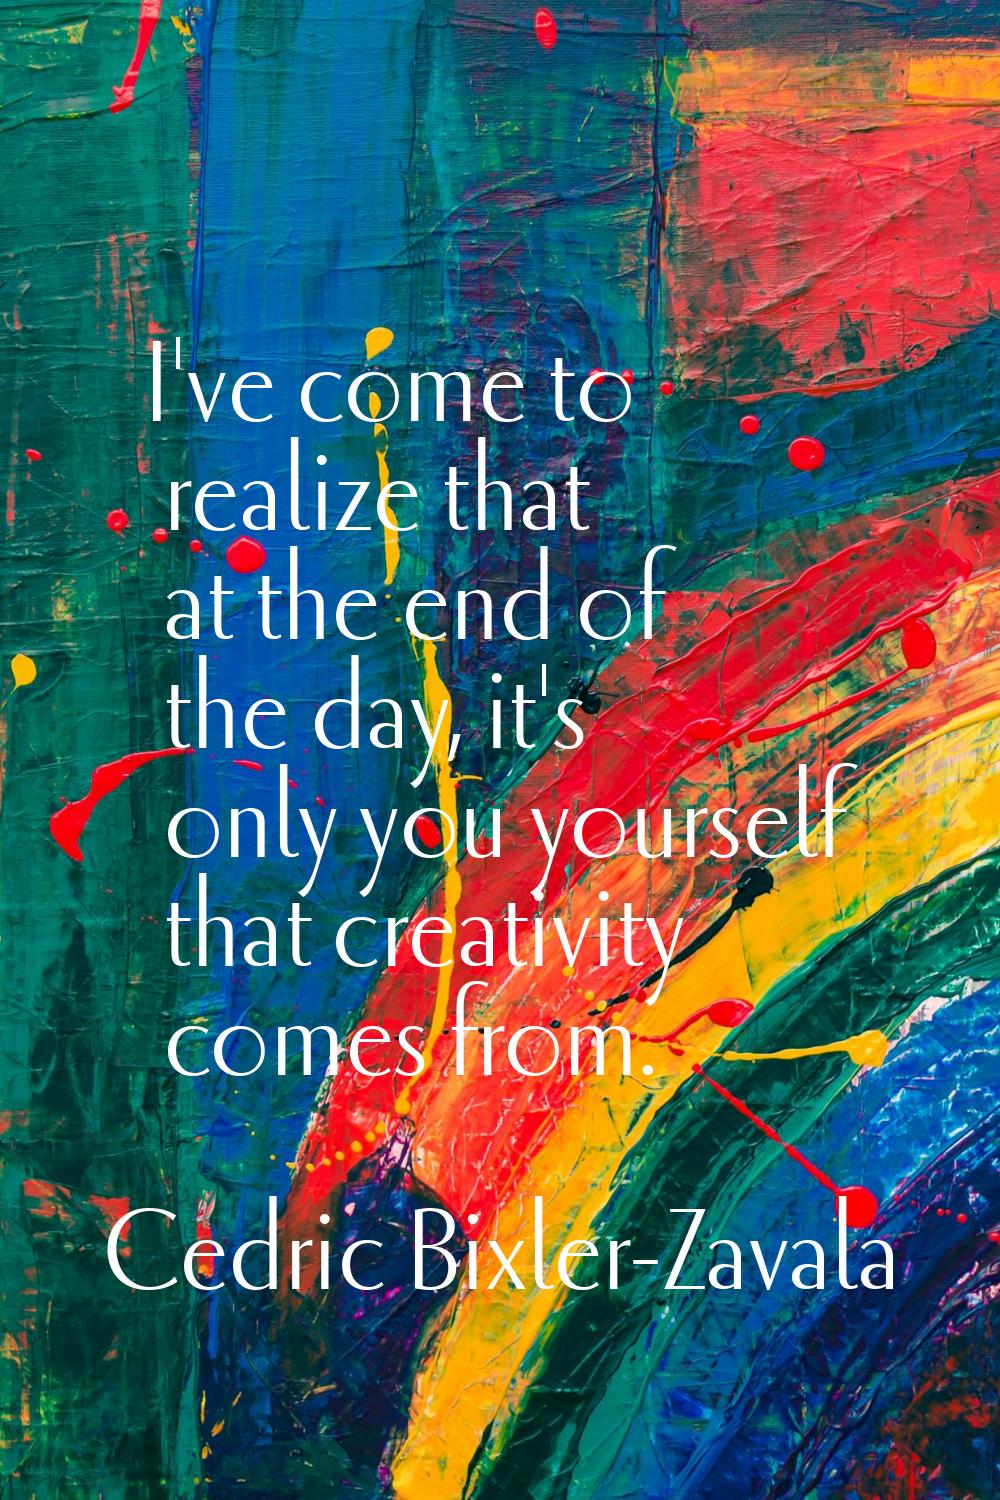 I've come to realize that at the end of the day, it's only you yourself that creativity comes from.